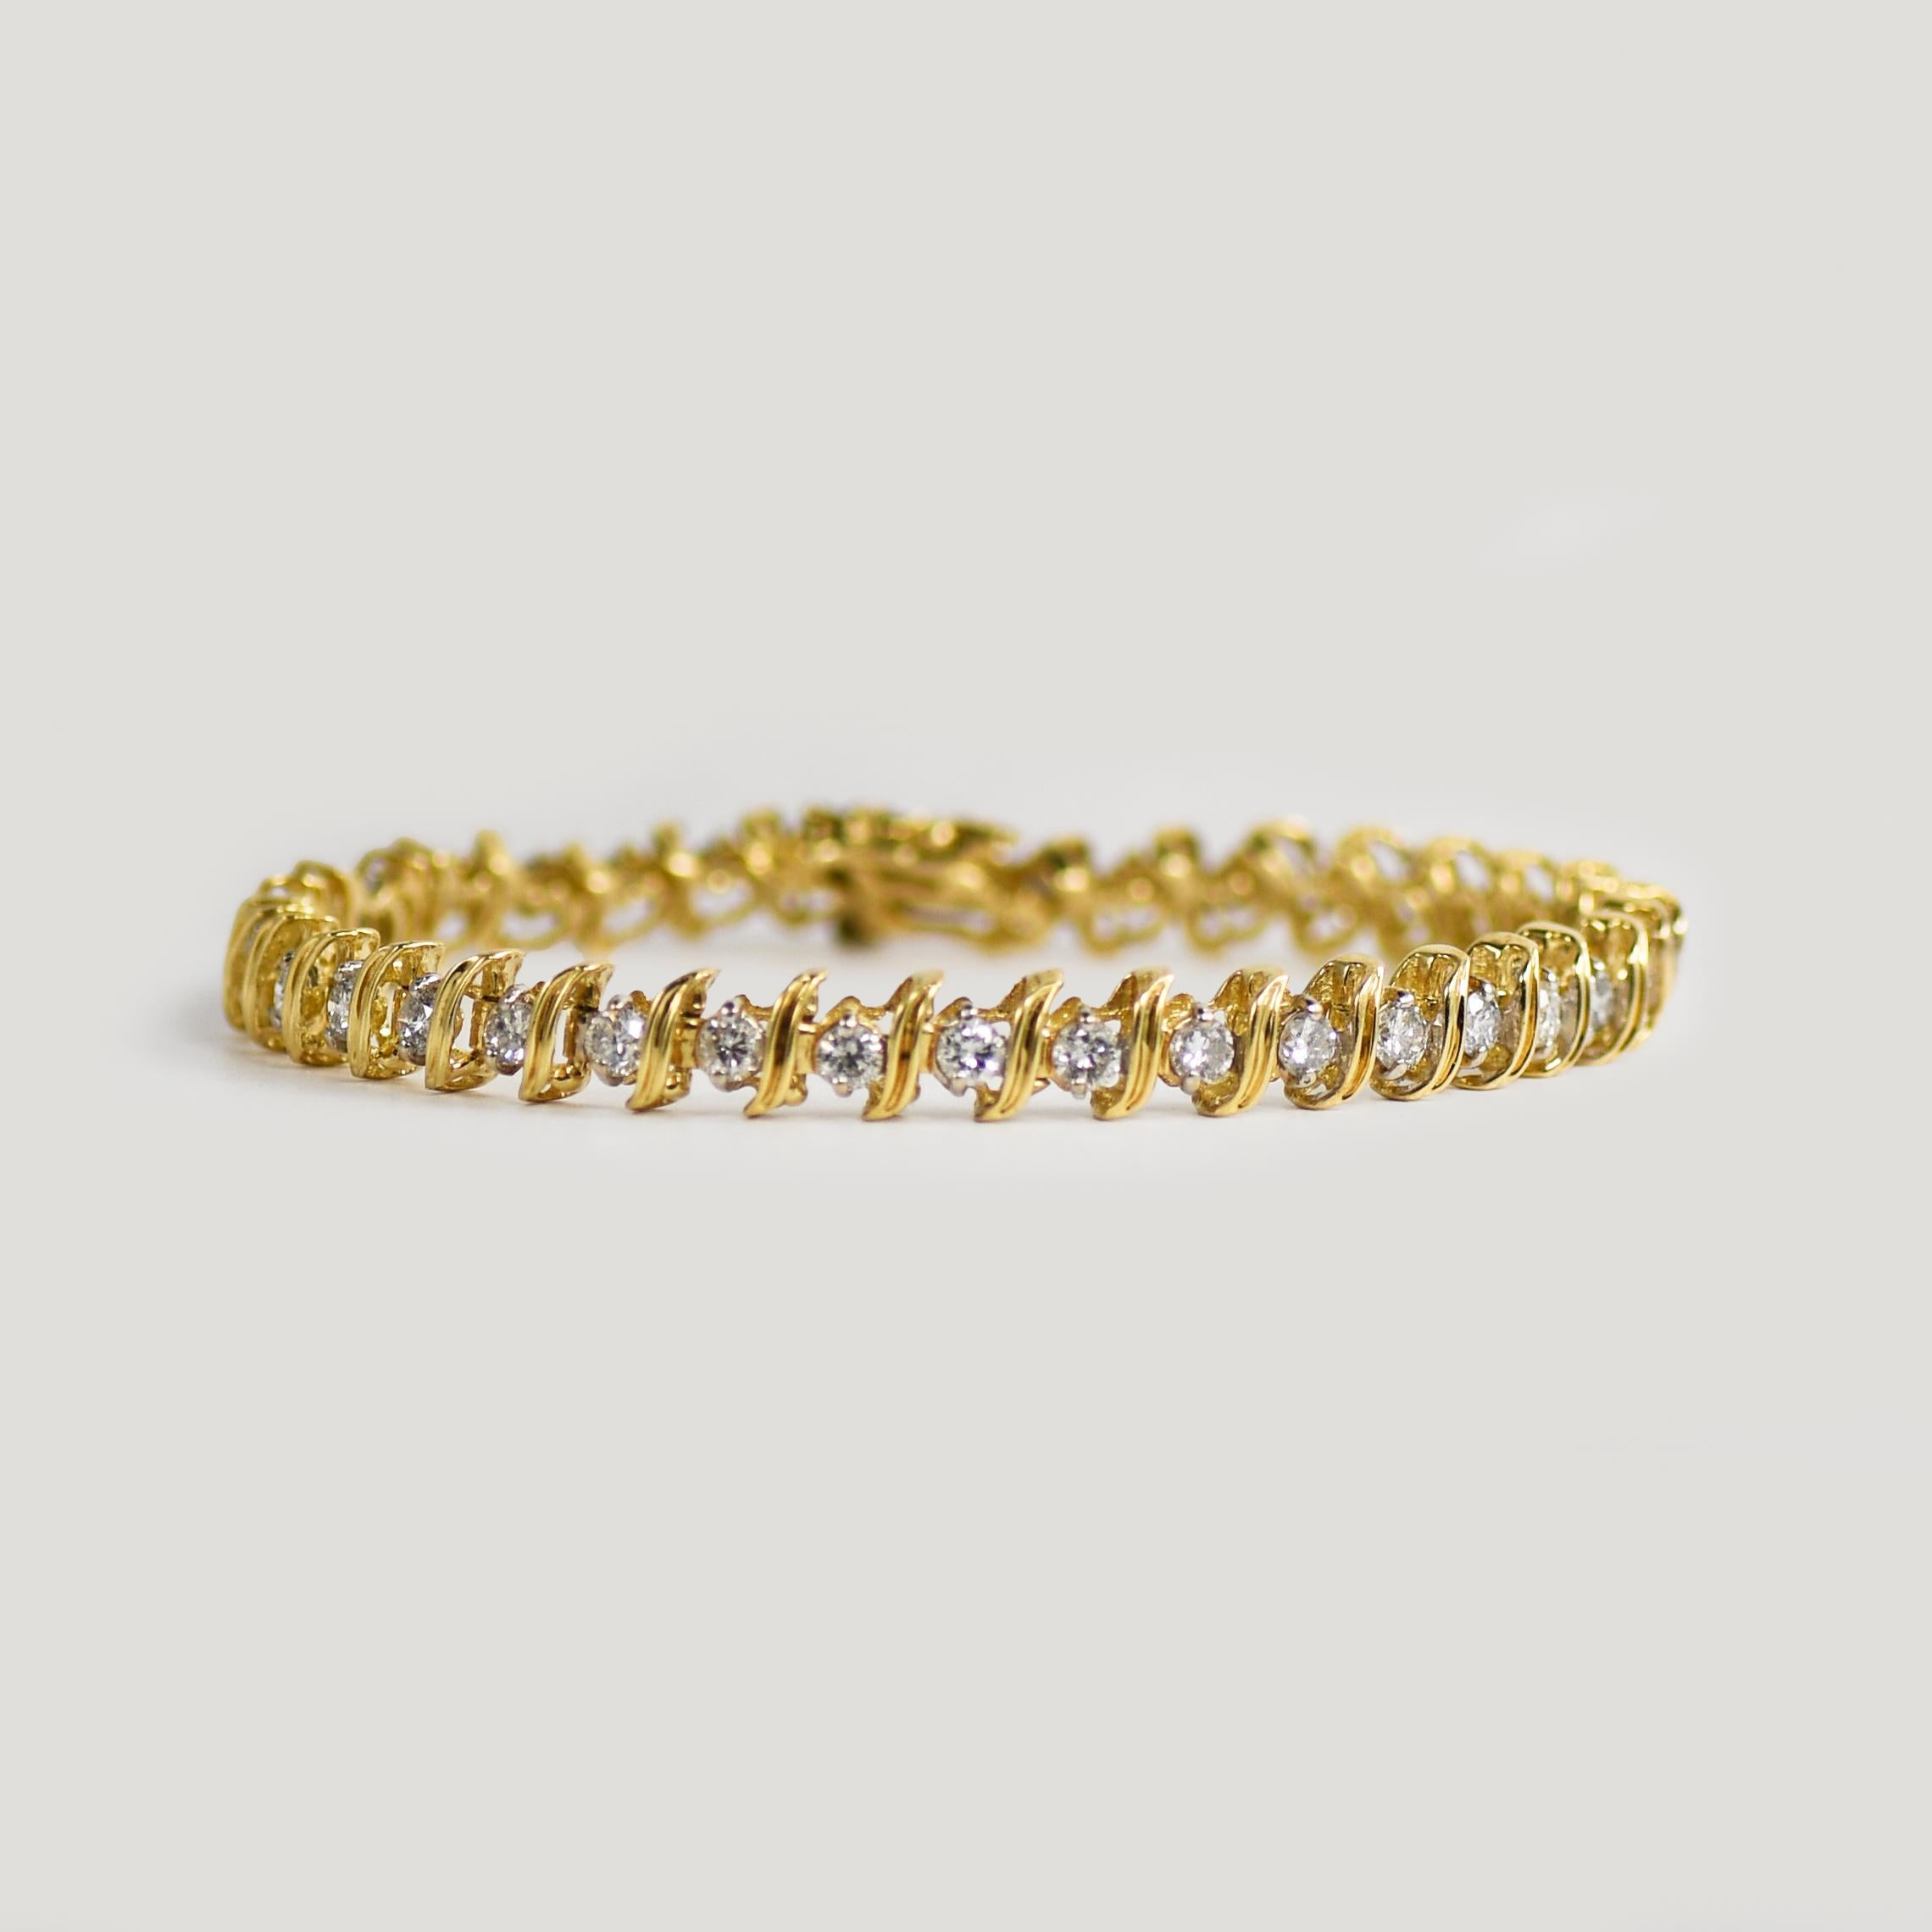 Diamond tennis bracelet in 14k yellow gold.
Marked 14k and weighs 12.6 grams.
There are 38 round brilliant cut diamonds, 3.00 total carats, g to h color, si to i1 color.
The bracelet measures 7 1/4